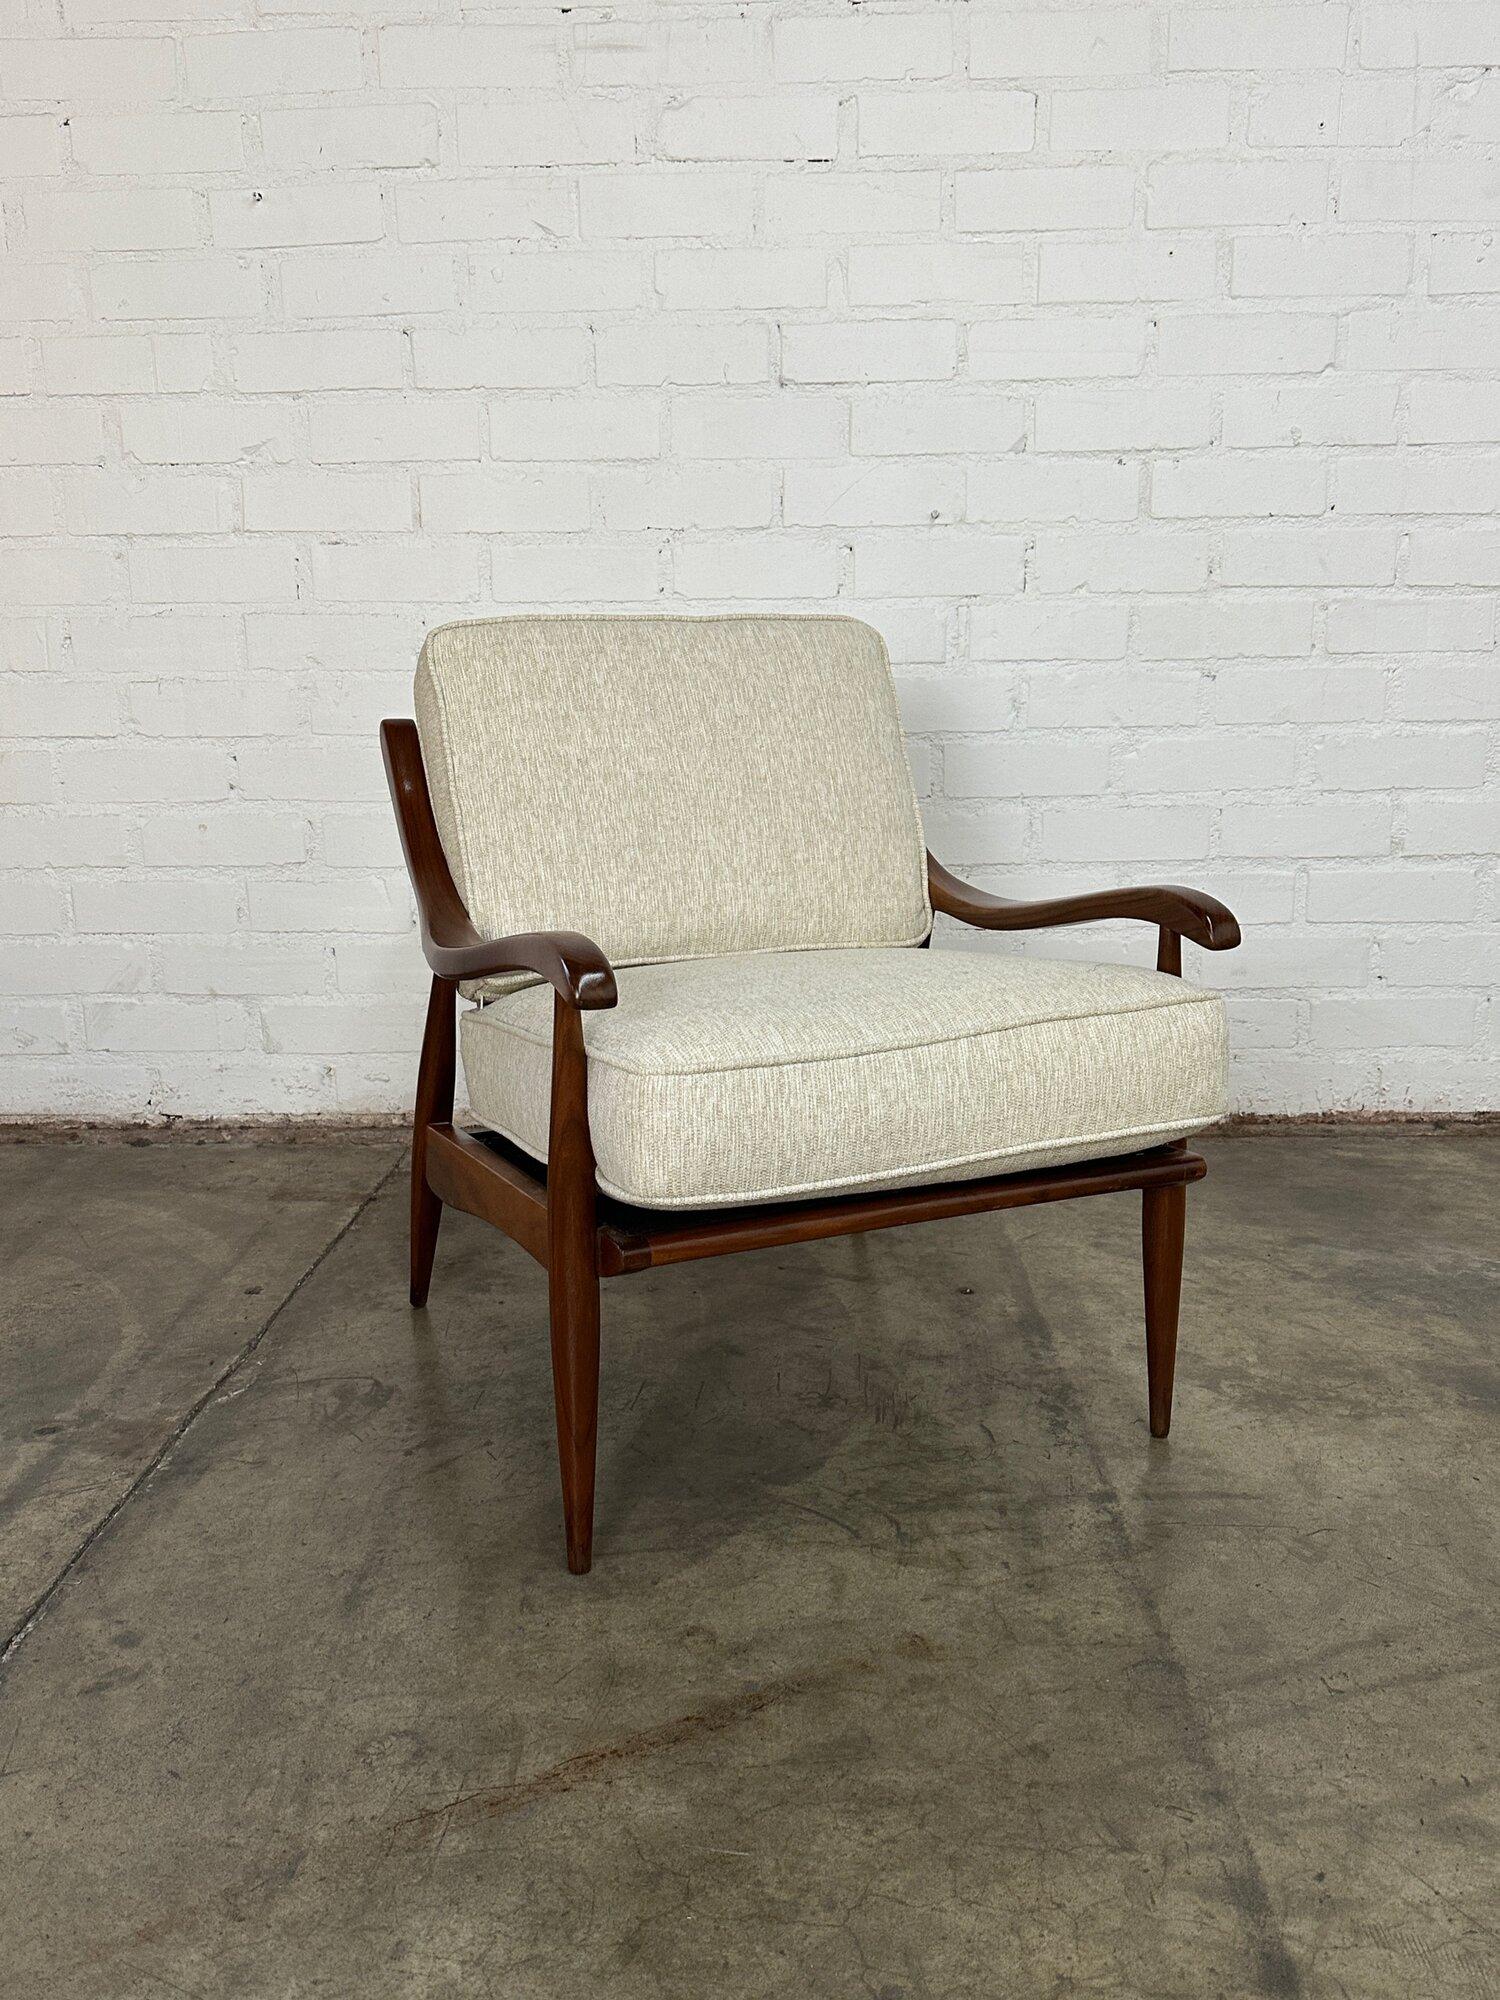 Mid-20th Century Mid Century Sculptural Wood Lounge Chair For Sale